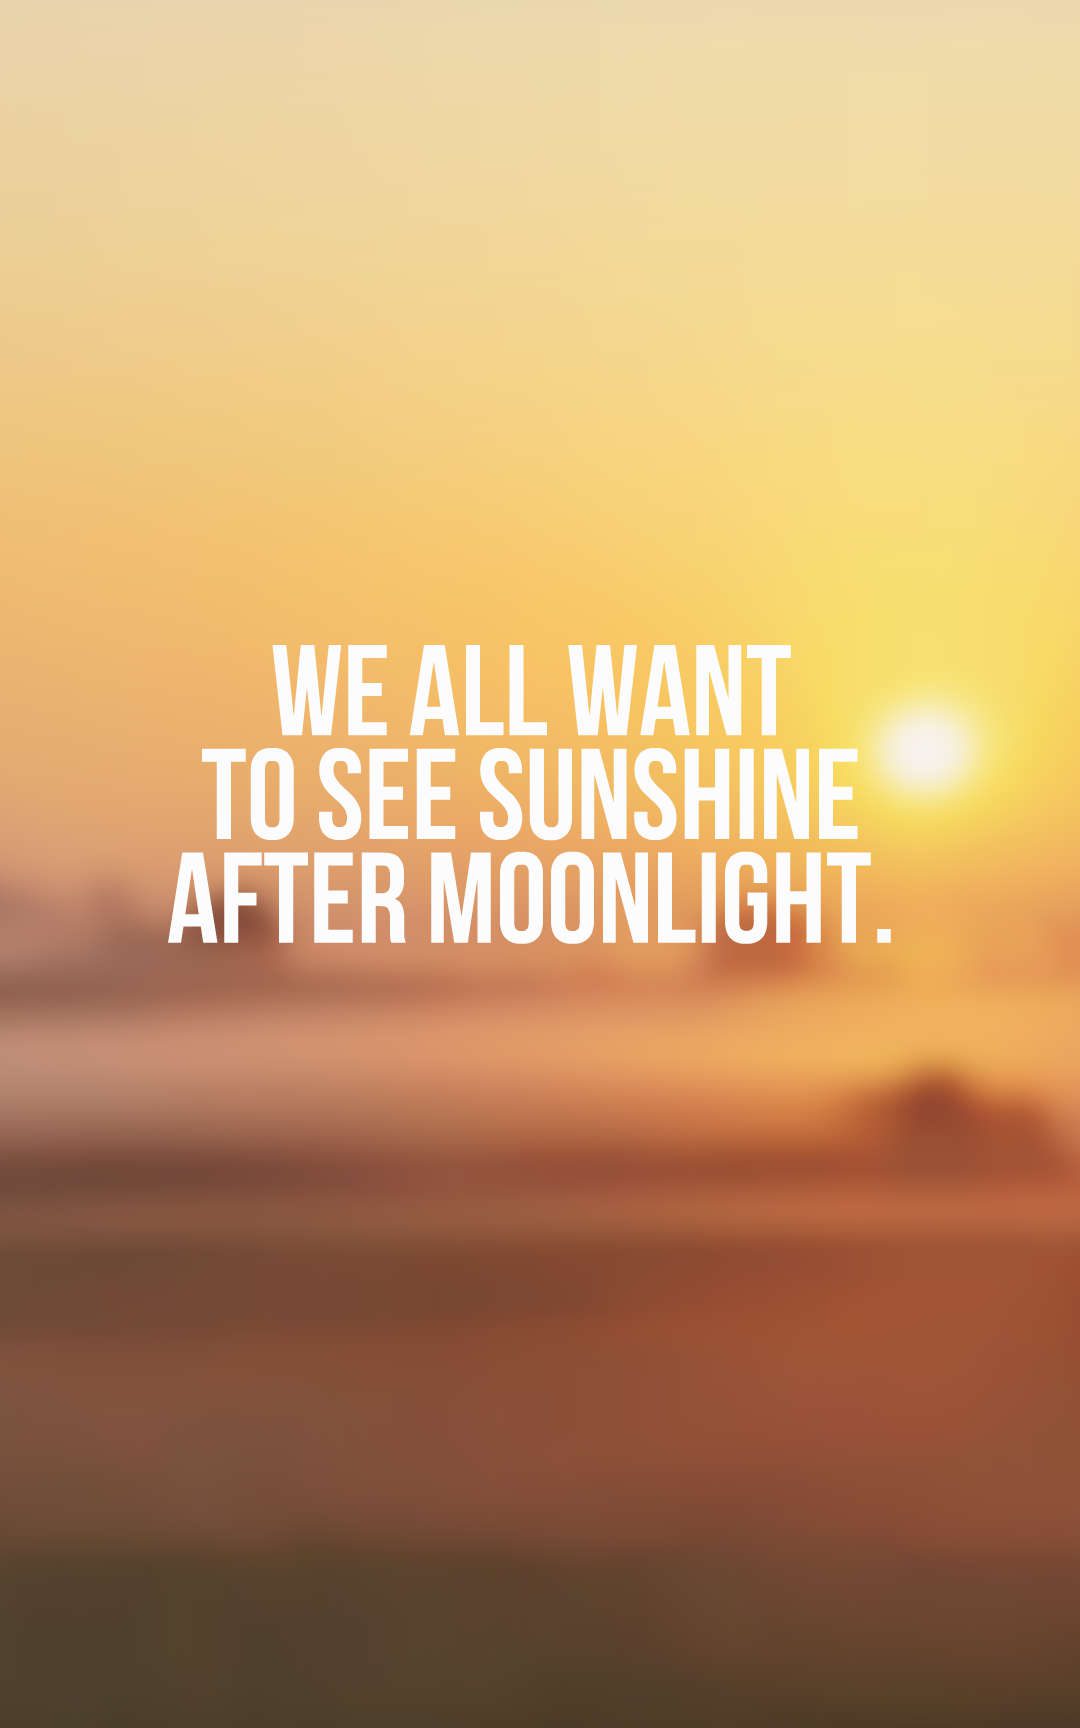 We all want to see Sunshine after Moonlight.